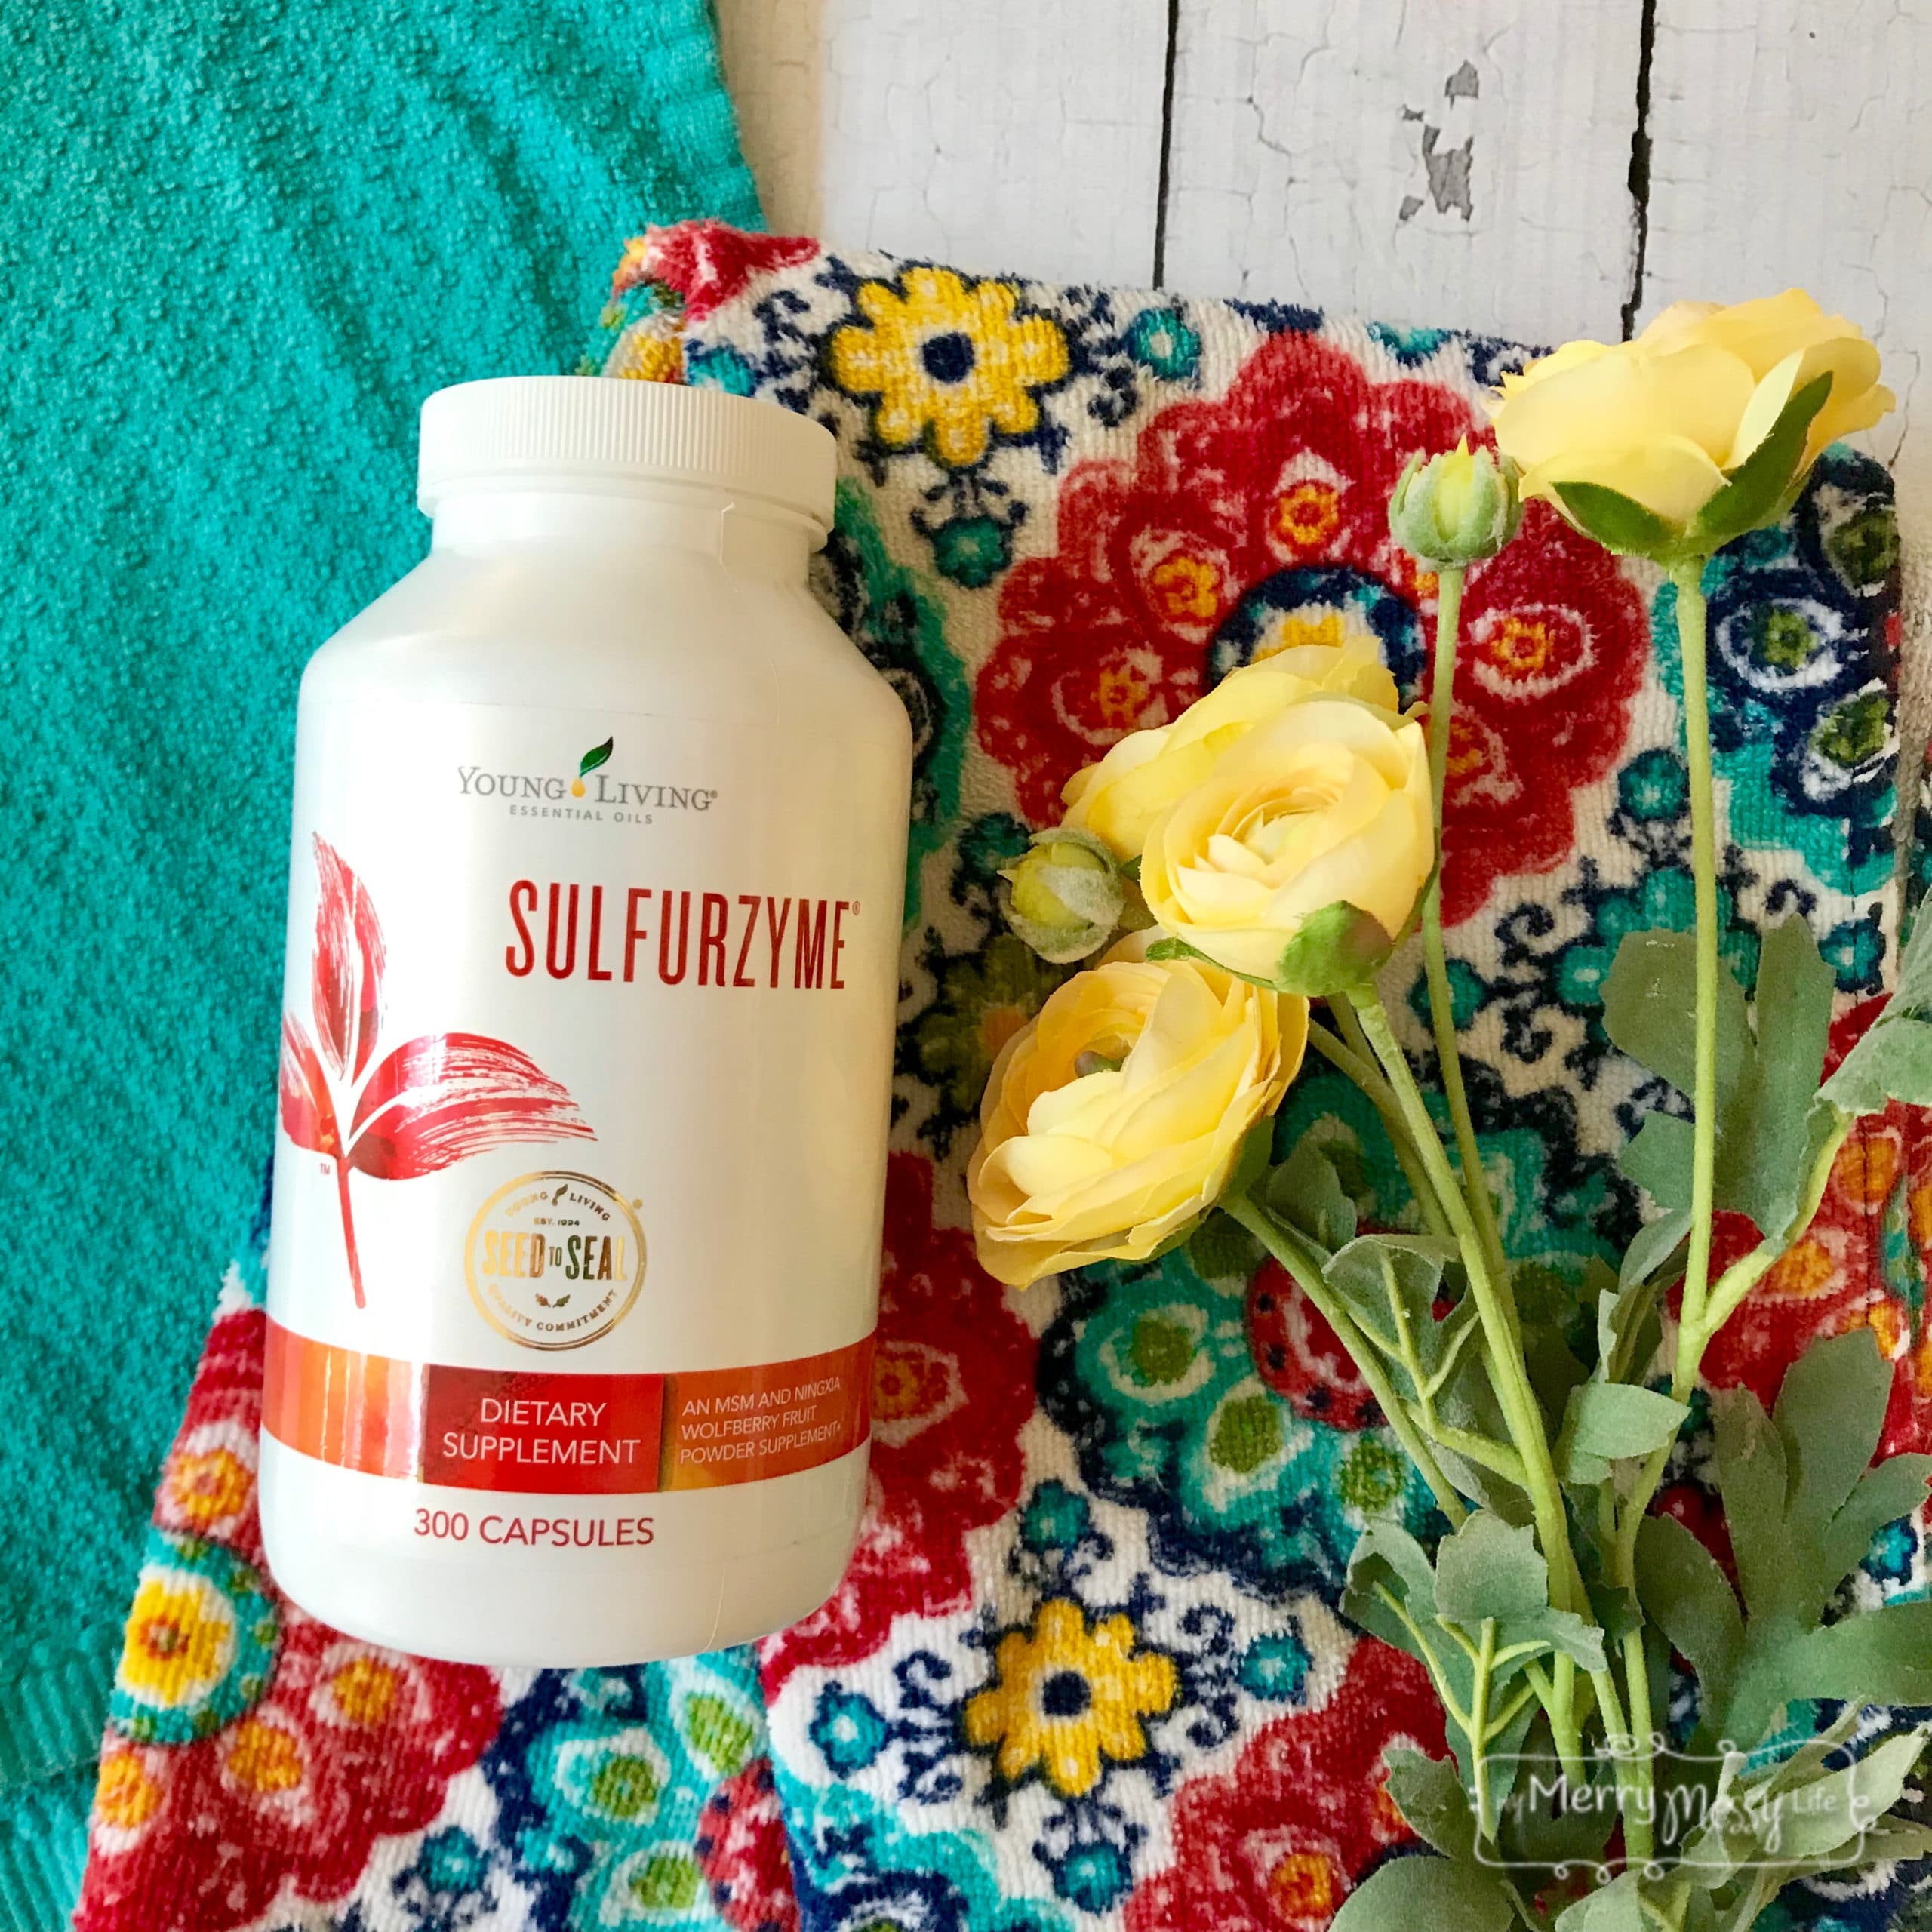 Sulfurzyme - one of my three favorite hair, nail and skin supplements. It helps the hair and skin especially and it supports connective tissues.